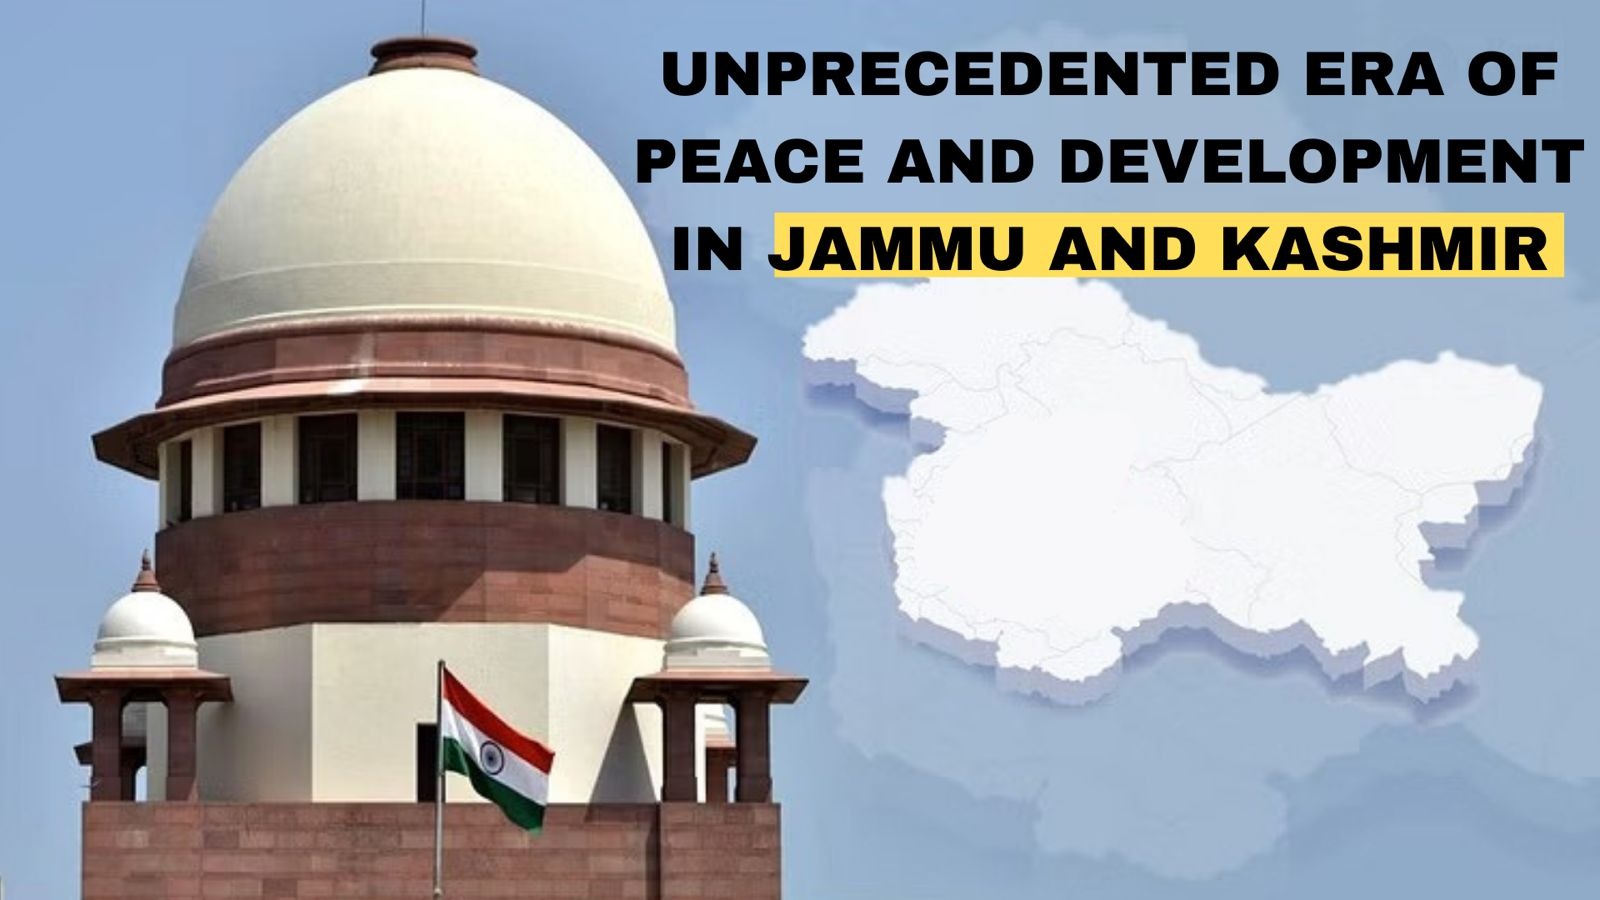 Unprecedented Era of Peace and Development in Jammu and Kashmir Following Article 370 Withdrawal: Centre to SC